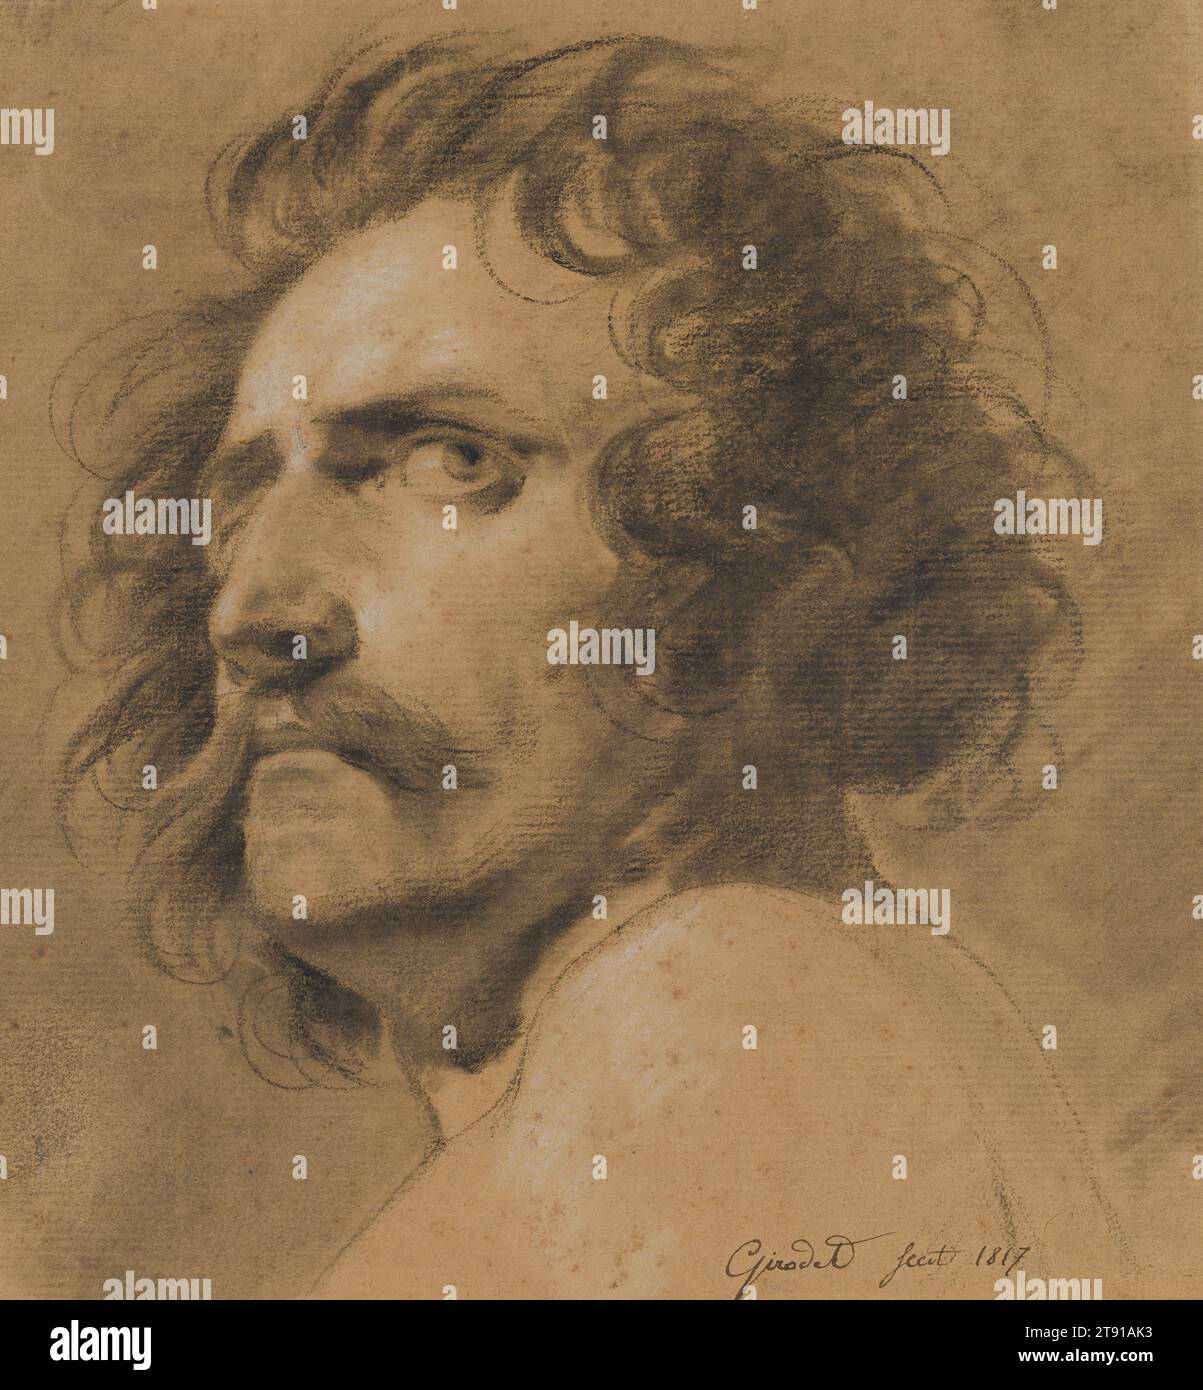 Head of a Mustachioed Man, Three-Quarter View, 1817, Anne-Louis Girodet de Roussy-Trioson, French, 1767–1824, 7 5/8 x 7 1/4 in. (19.4 x 18.4 cm) (image, irregular)14 5/8 x 13 15/16 x 1 1/2 in. (37.15 x 35.4 x 3.81 cm) (outer frame), Charcoal, black and white chalk, with stumping on beige paper, France, 19th century, While this head study was likely drawn from life, the figure’s mustache distances him from the everyday world of Anne-Louis Girodet’s Paris. The drawing can be associated with the artist’s so-called Oriental heads or portraits—a group of late works picturing men from the Near East Stock Photo